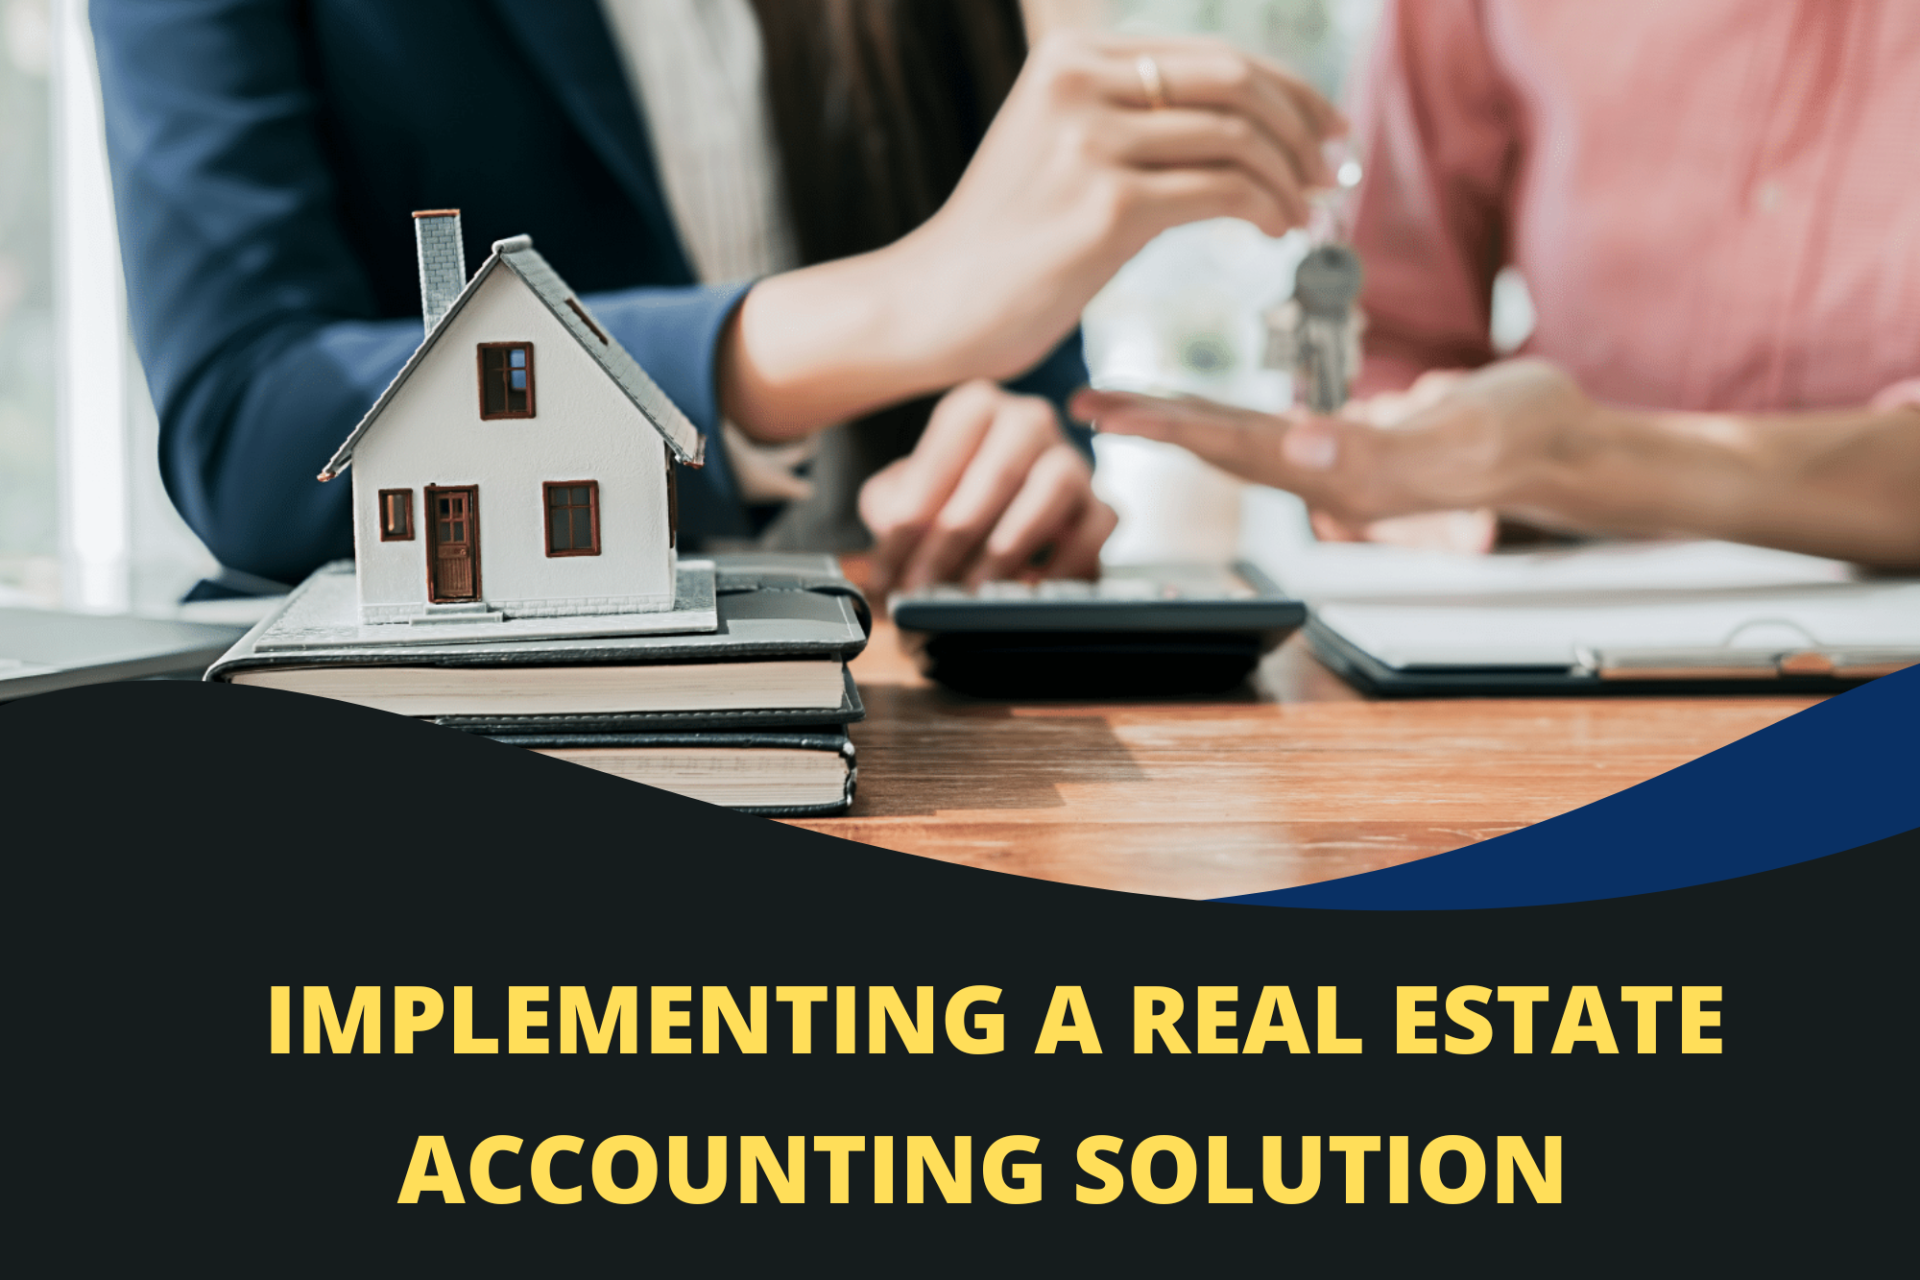 Real Estate Accounting Solution